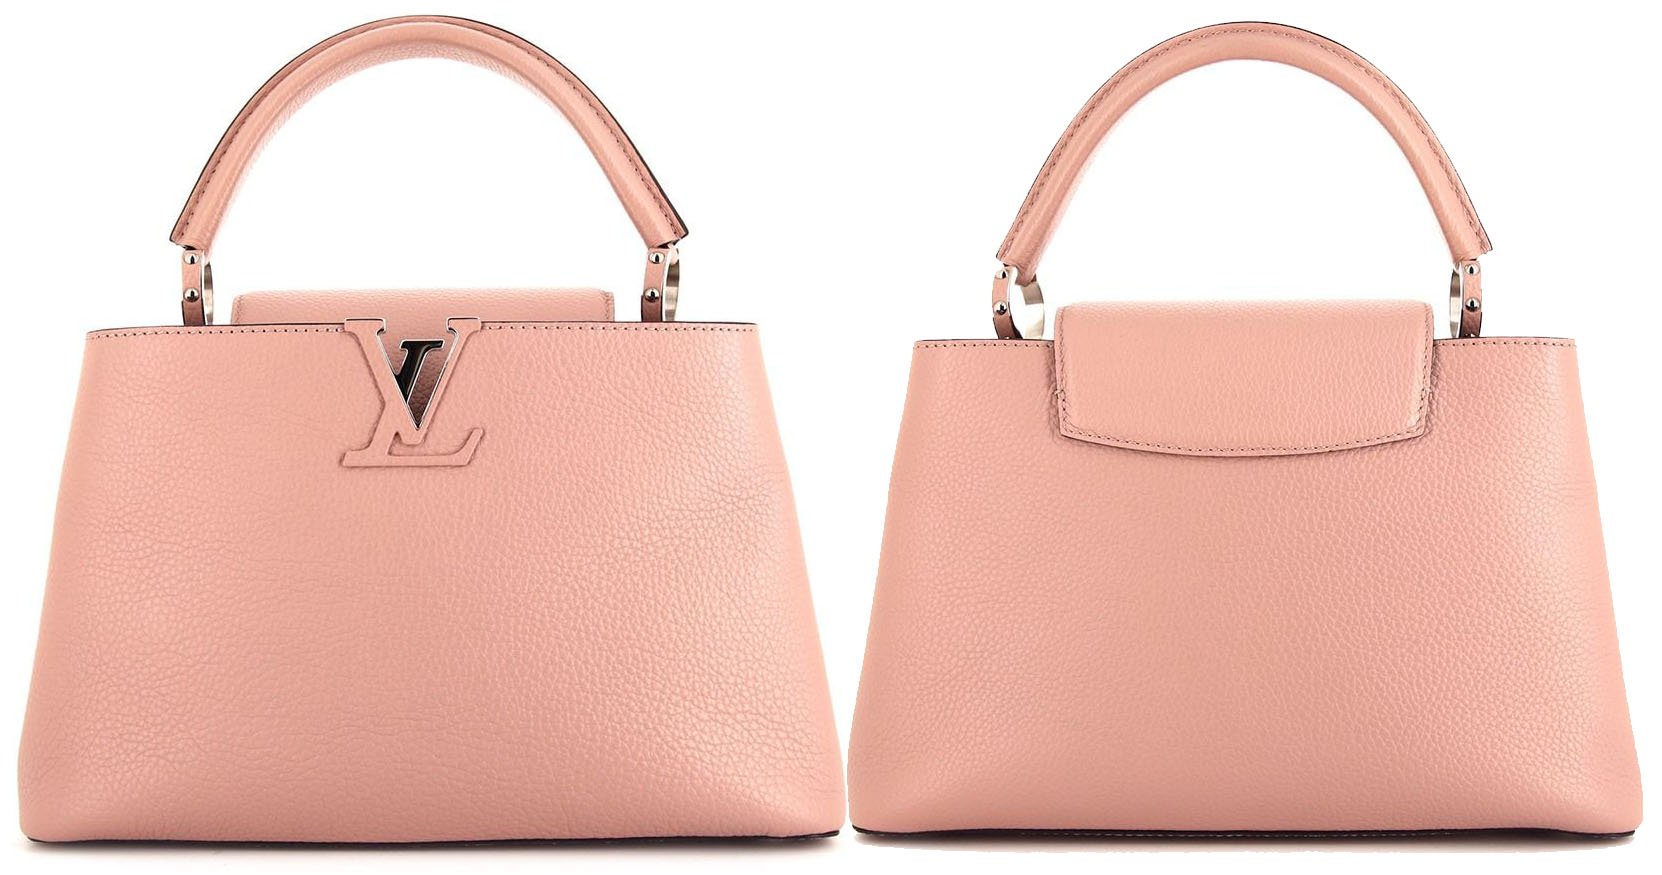 Louis Vuitton's Capucines features a structured rectangular silhouette made from soft Taurillon leather